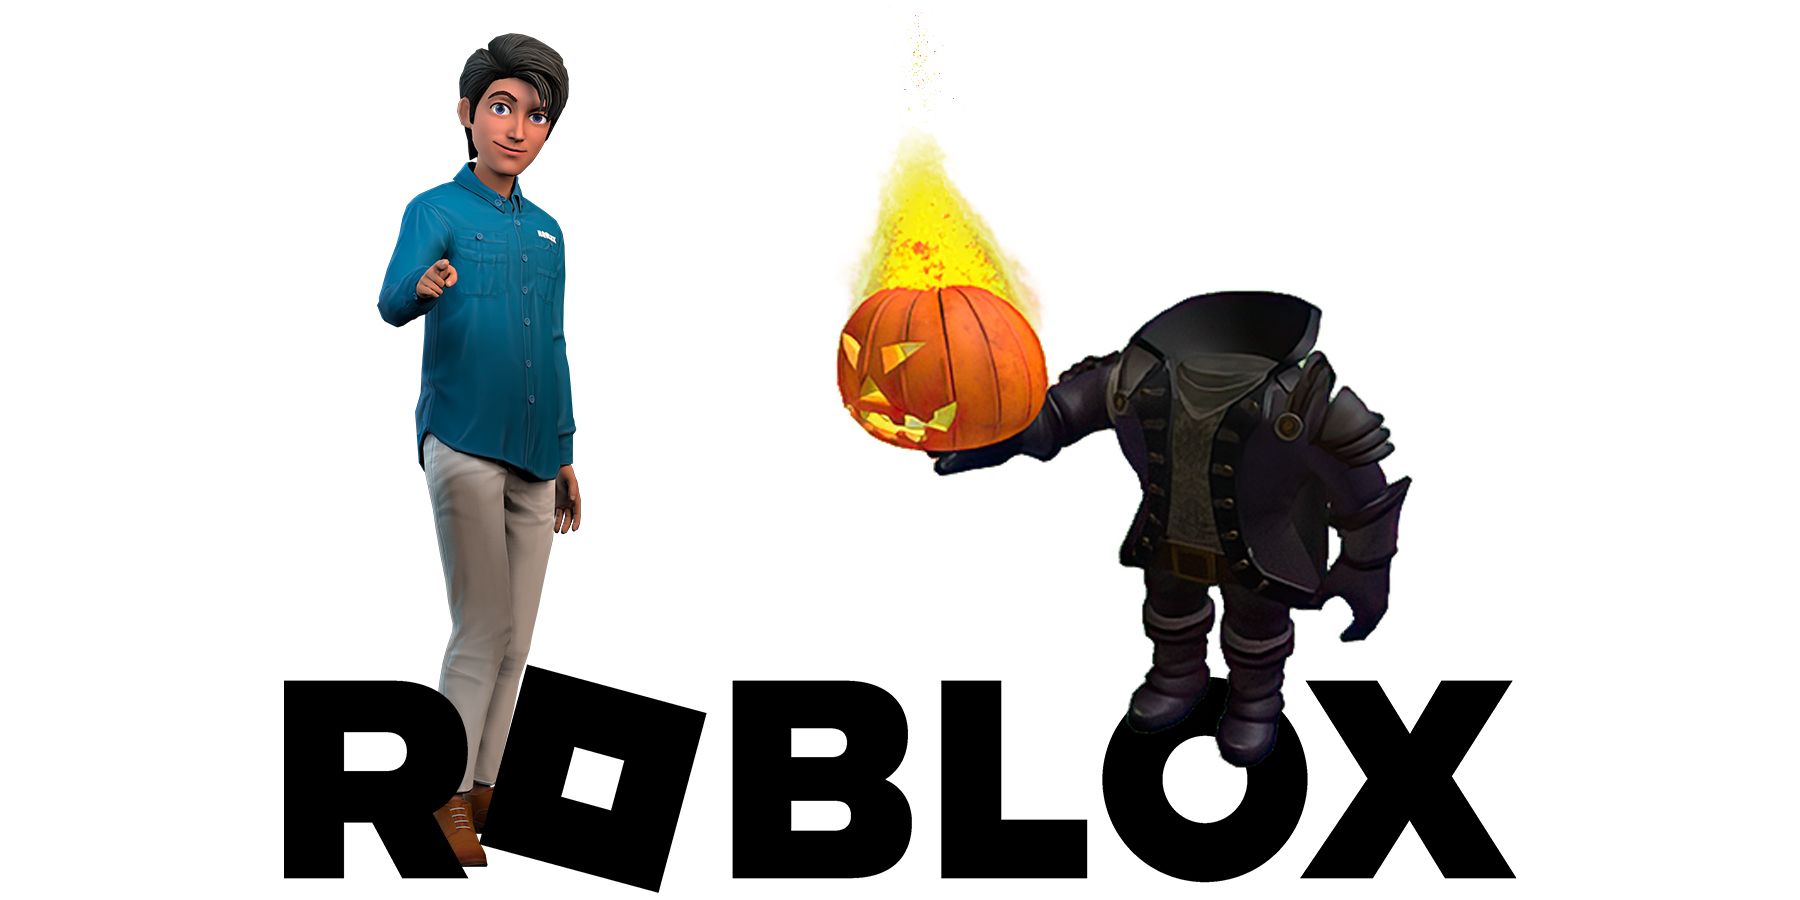 Roblox Accidentally Gives Away Headless Horseman For Free